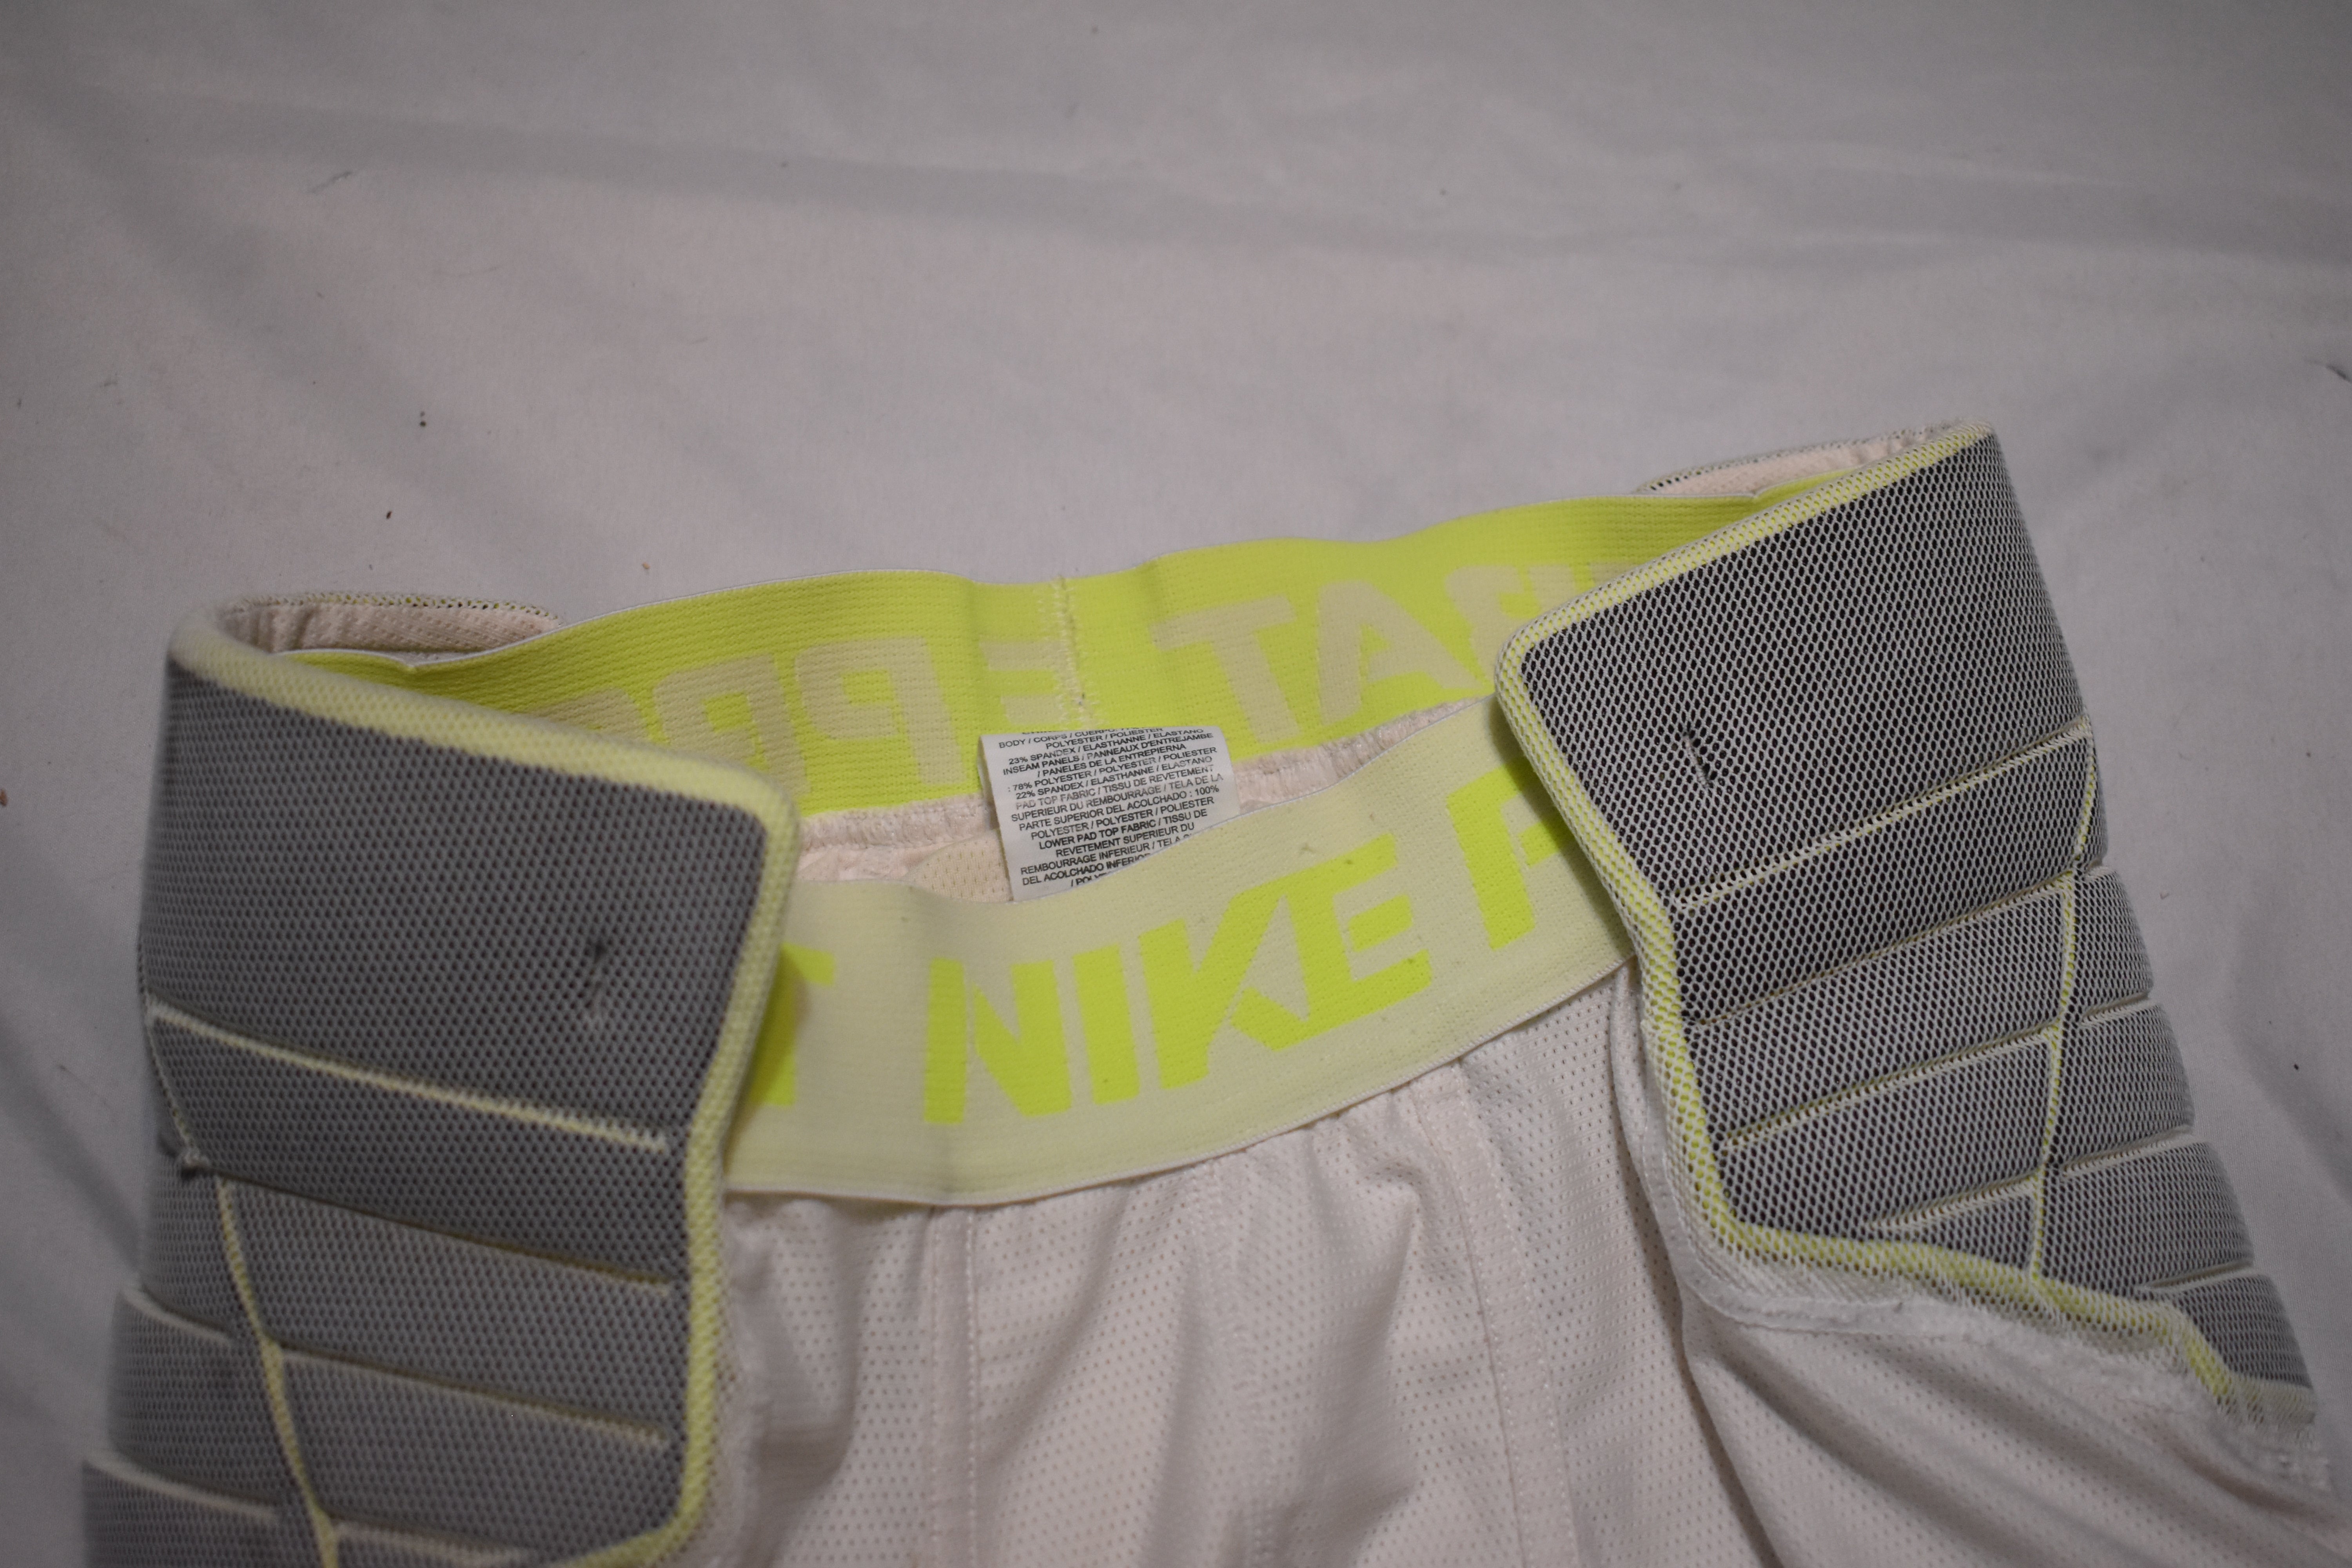 Nike Pro Combat Hyperstrong Football Girdle, White/Silver, Adult